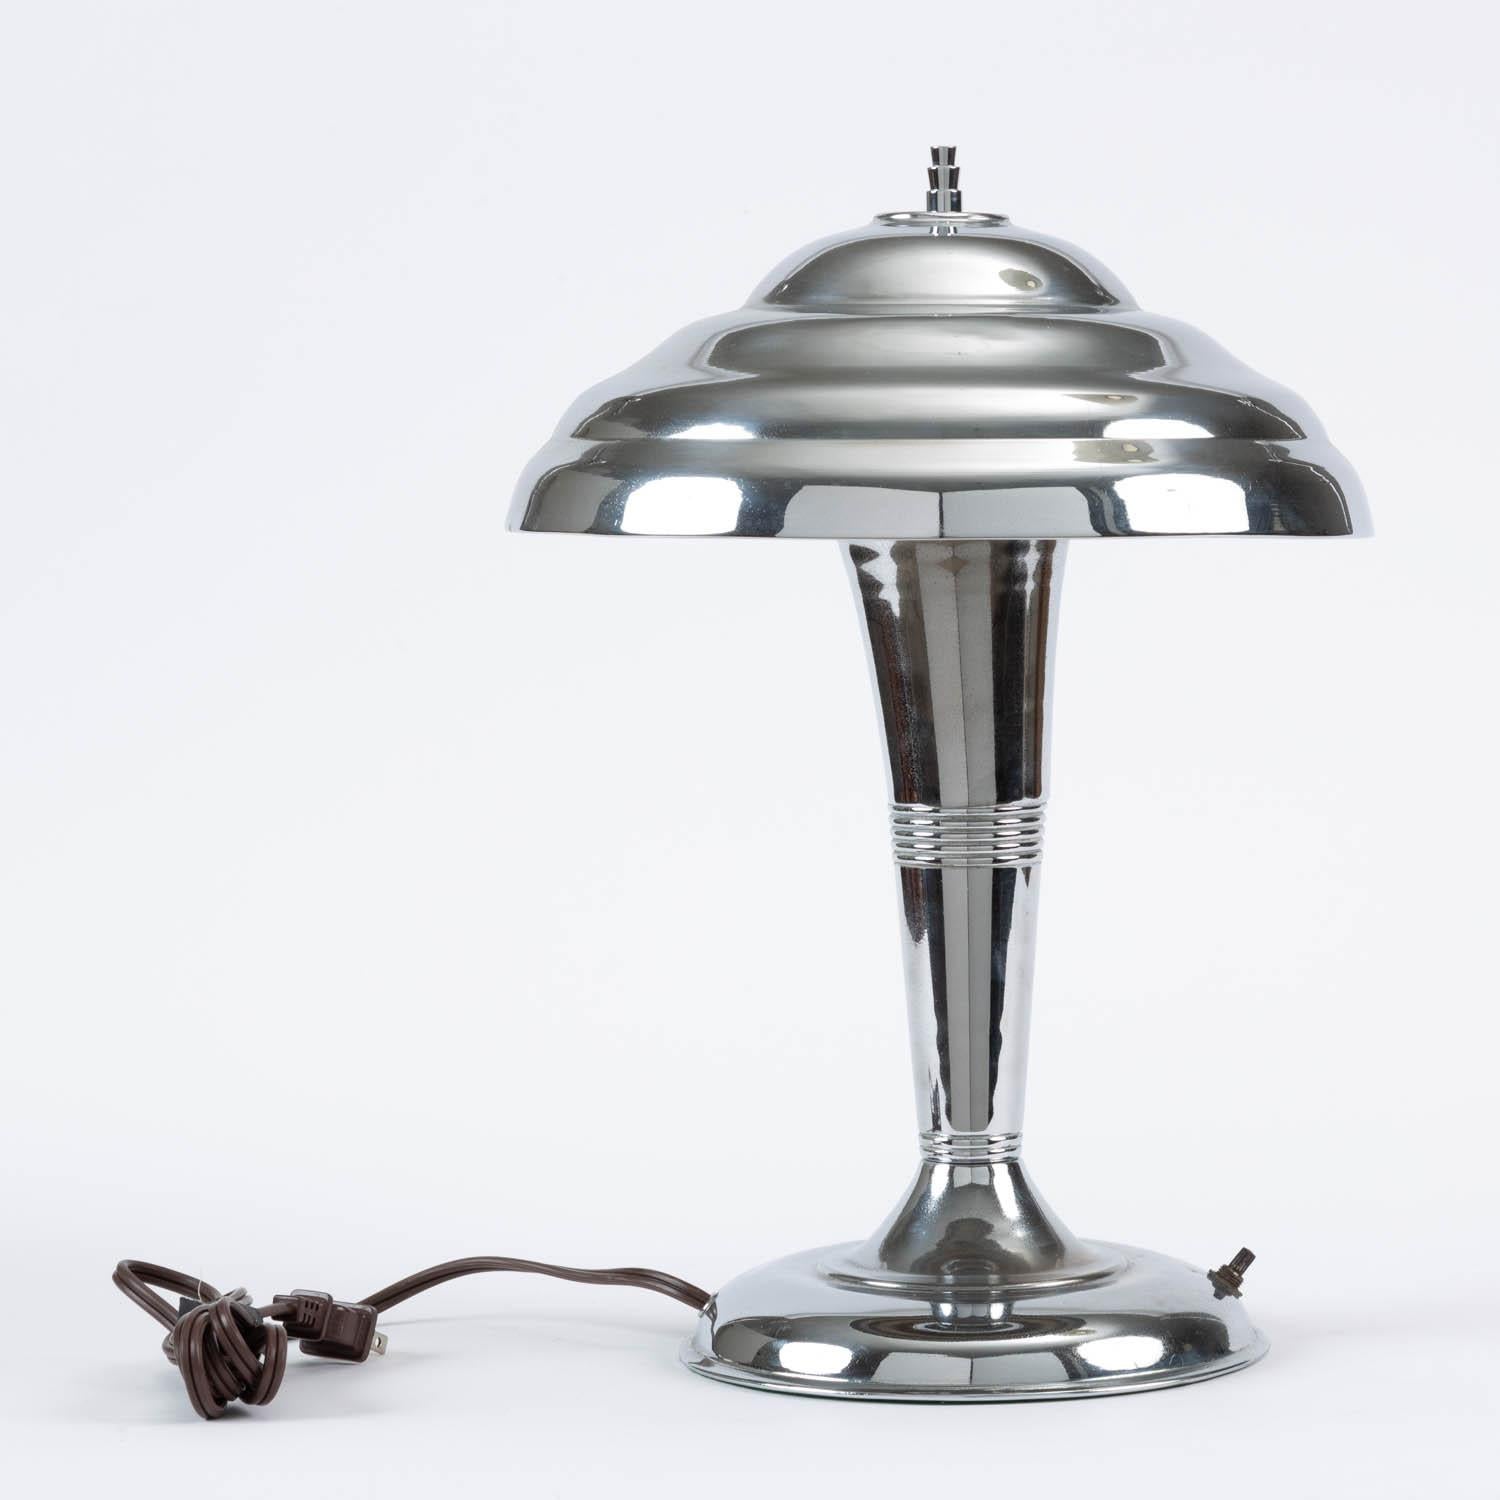 Plated Chrome Art Deco Table Lamp with Saucer Shade